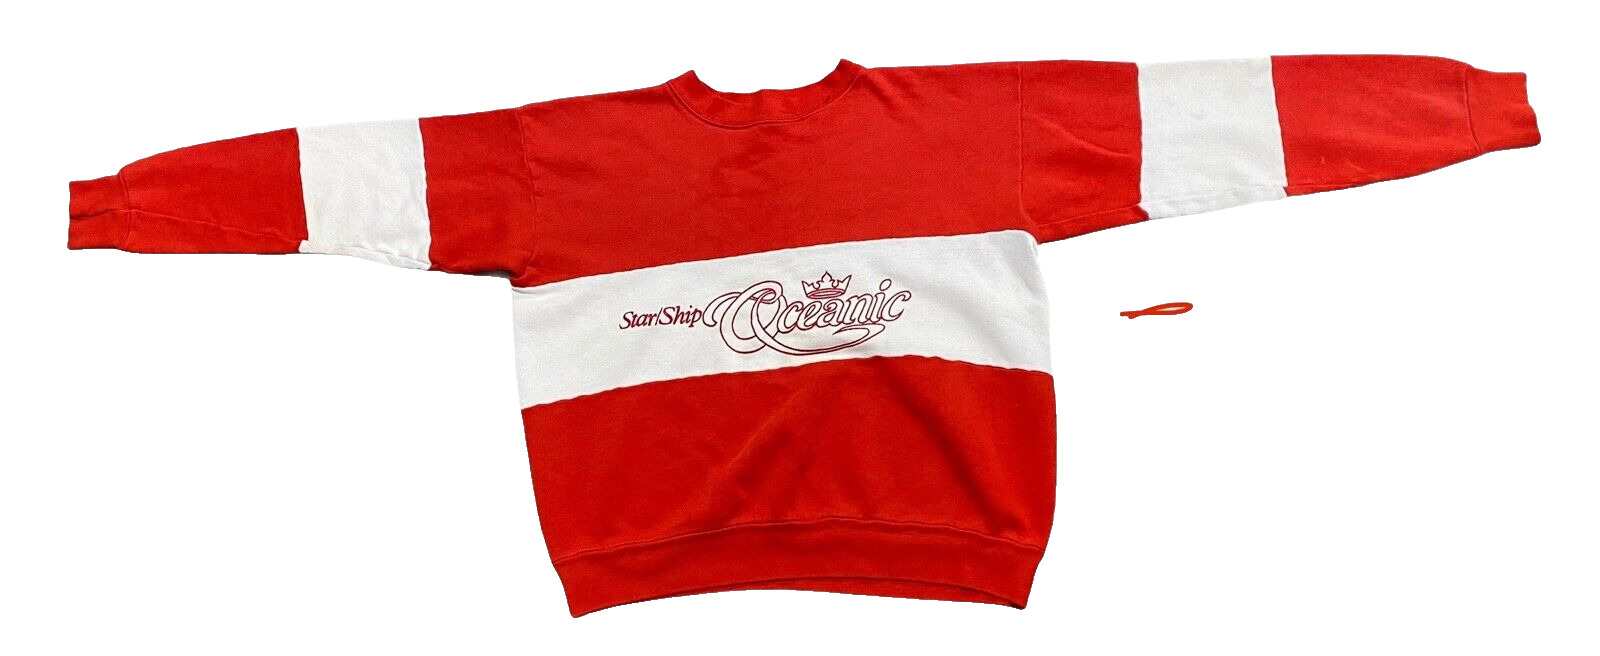 Starship Oceanic Sweater (Disney) Vintage Size Small S Red White Long Sleeve